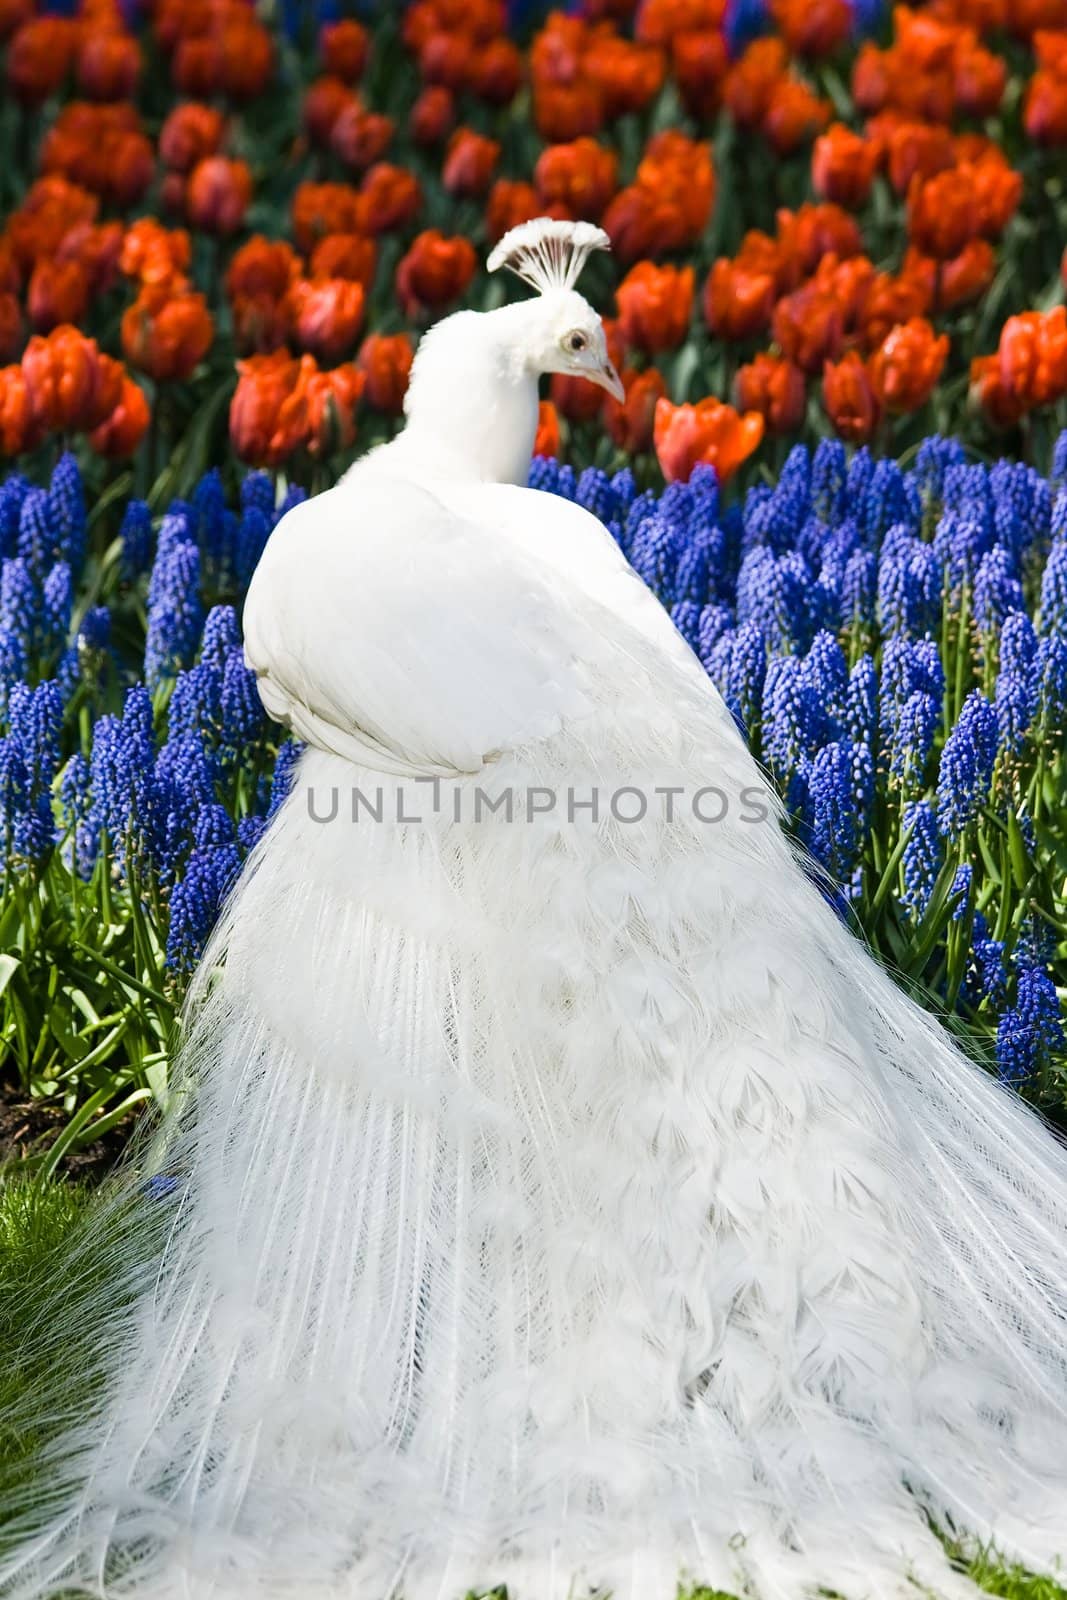 White peacock in spring with red and blue flowers